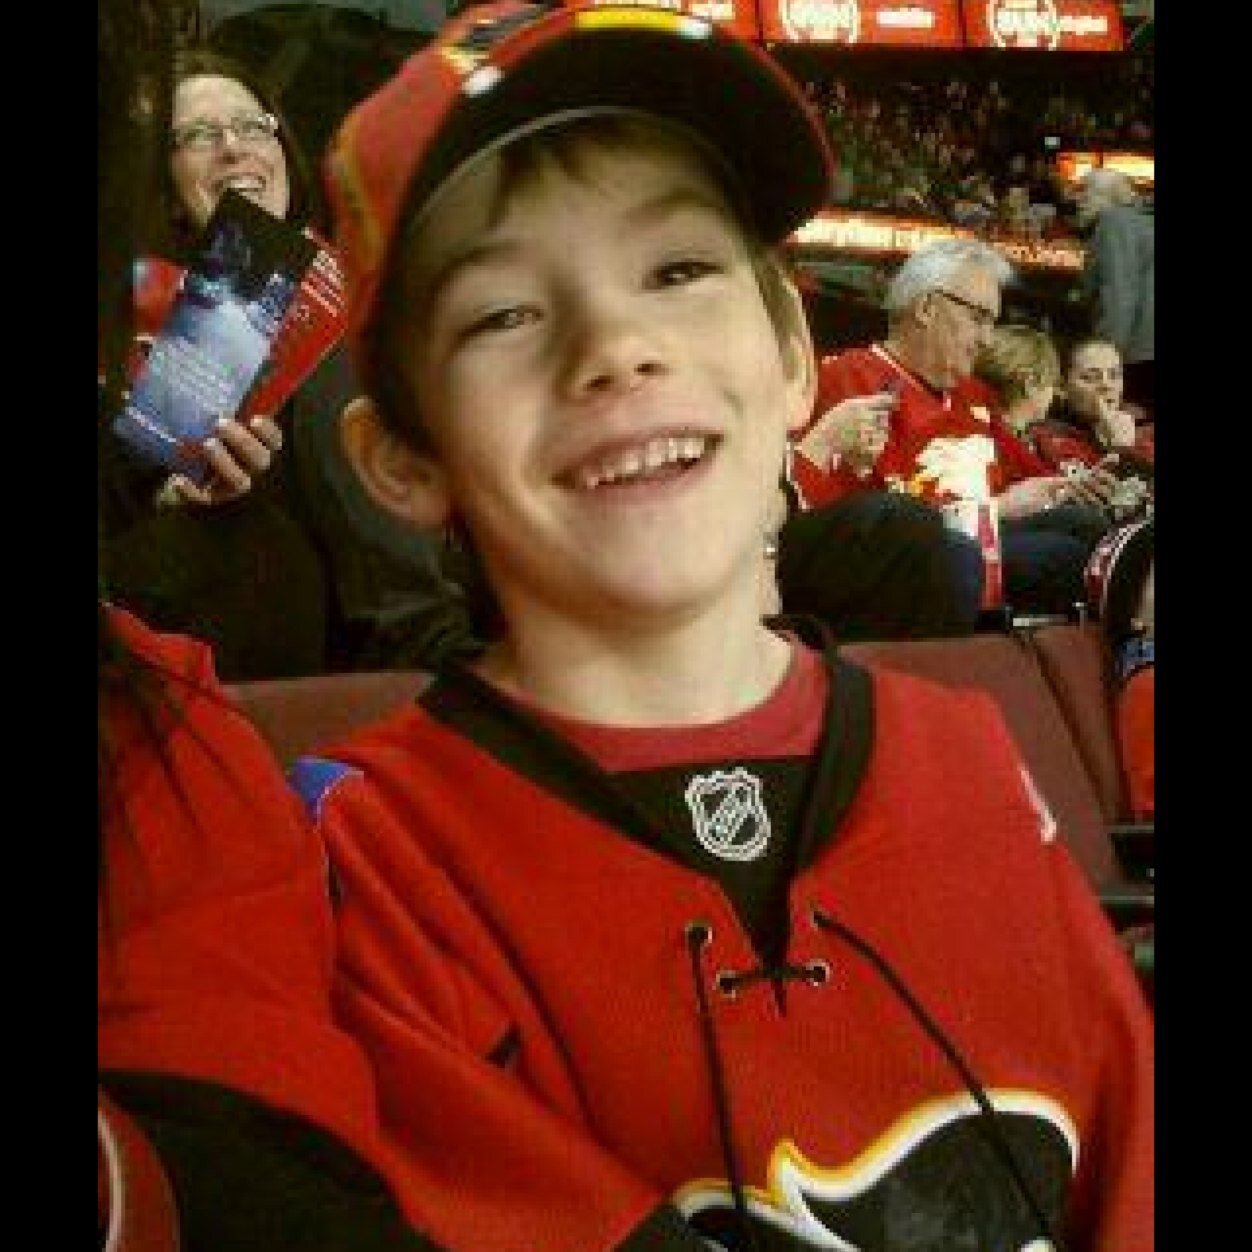 Go Flames Go Number one fan